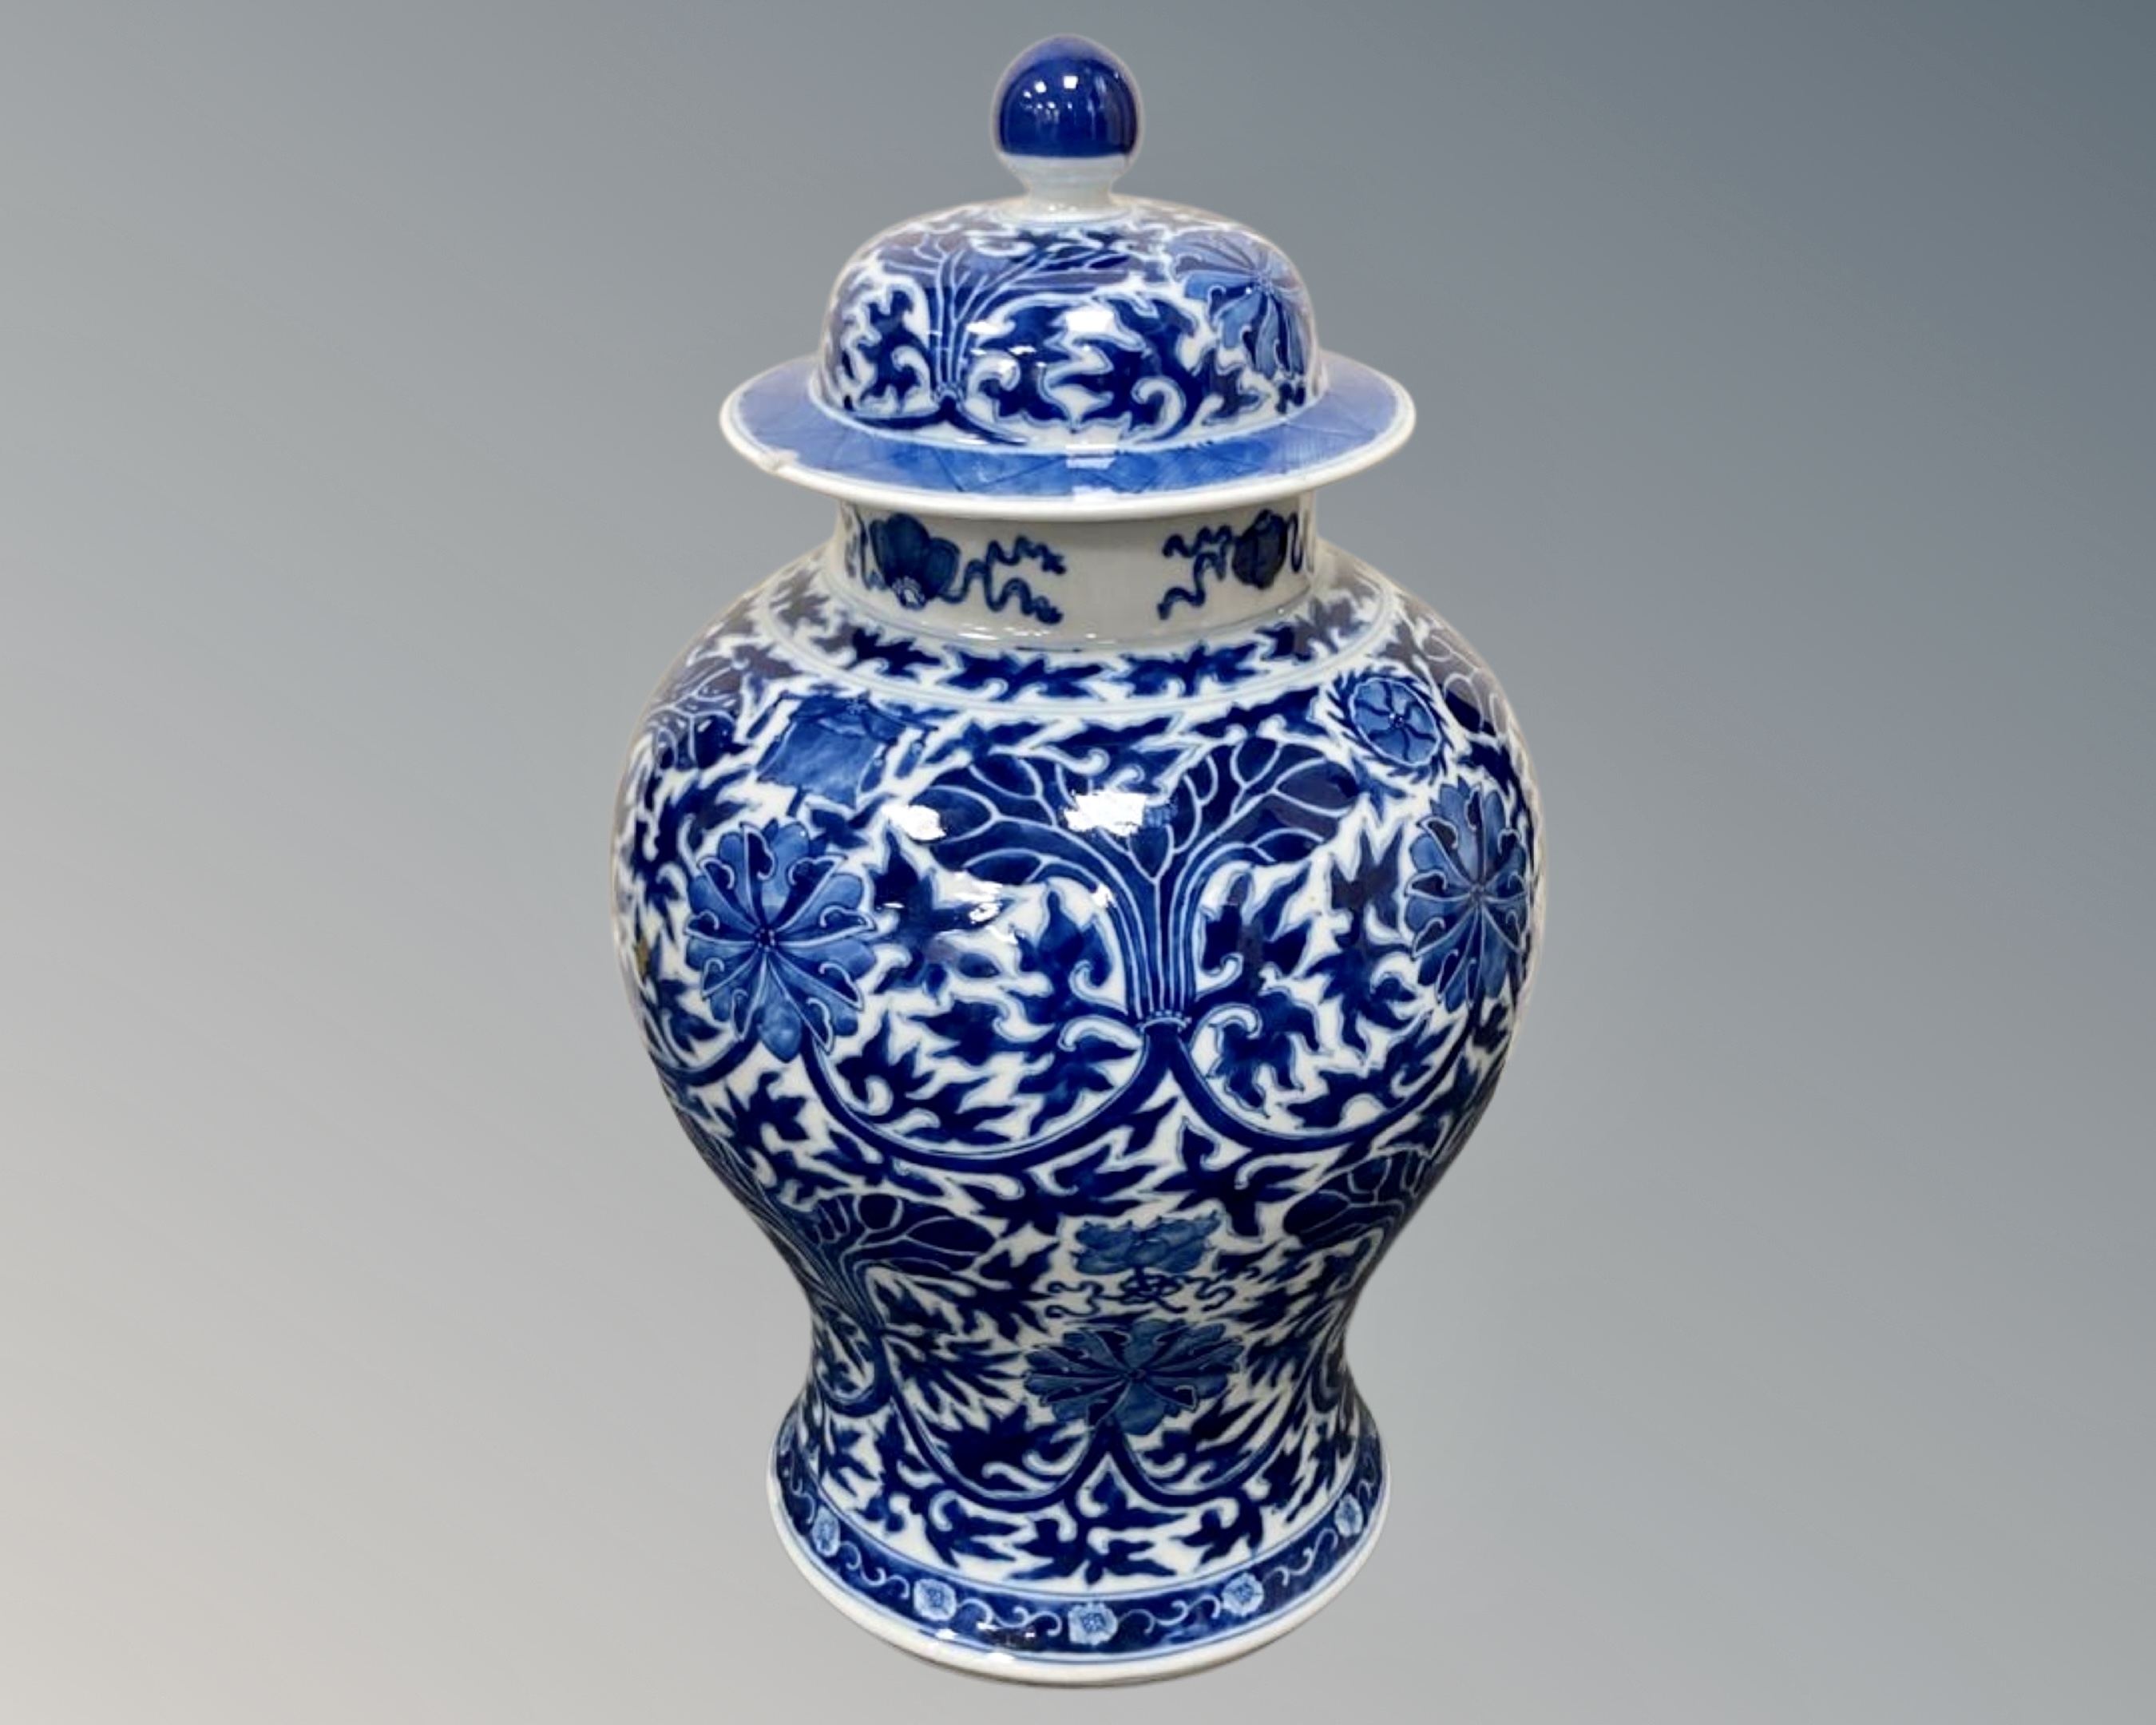 A Chinese blue and white lidded urn, height 43.5 cm, Kangxi six character mark to base.